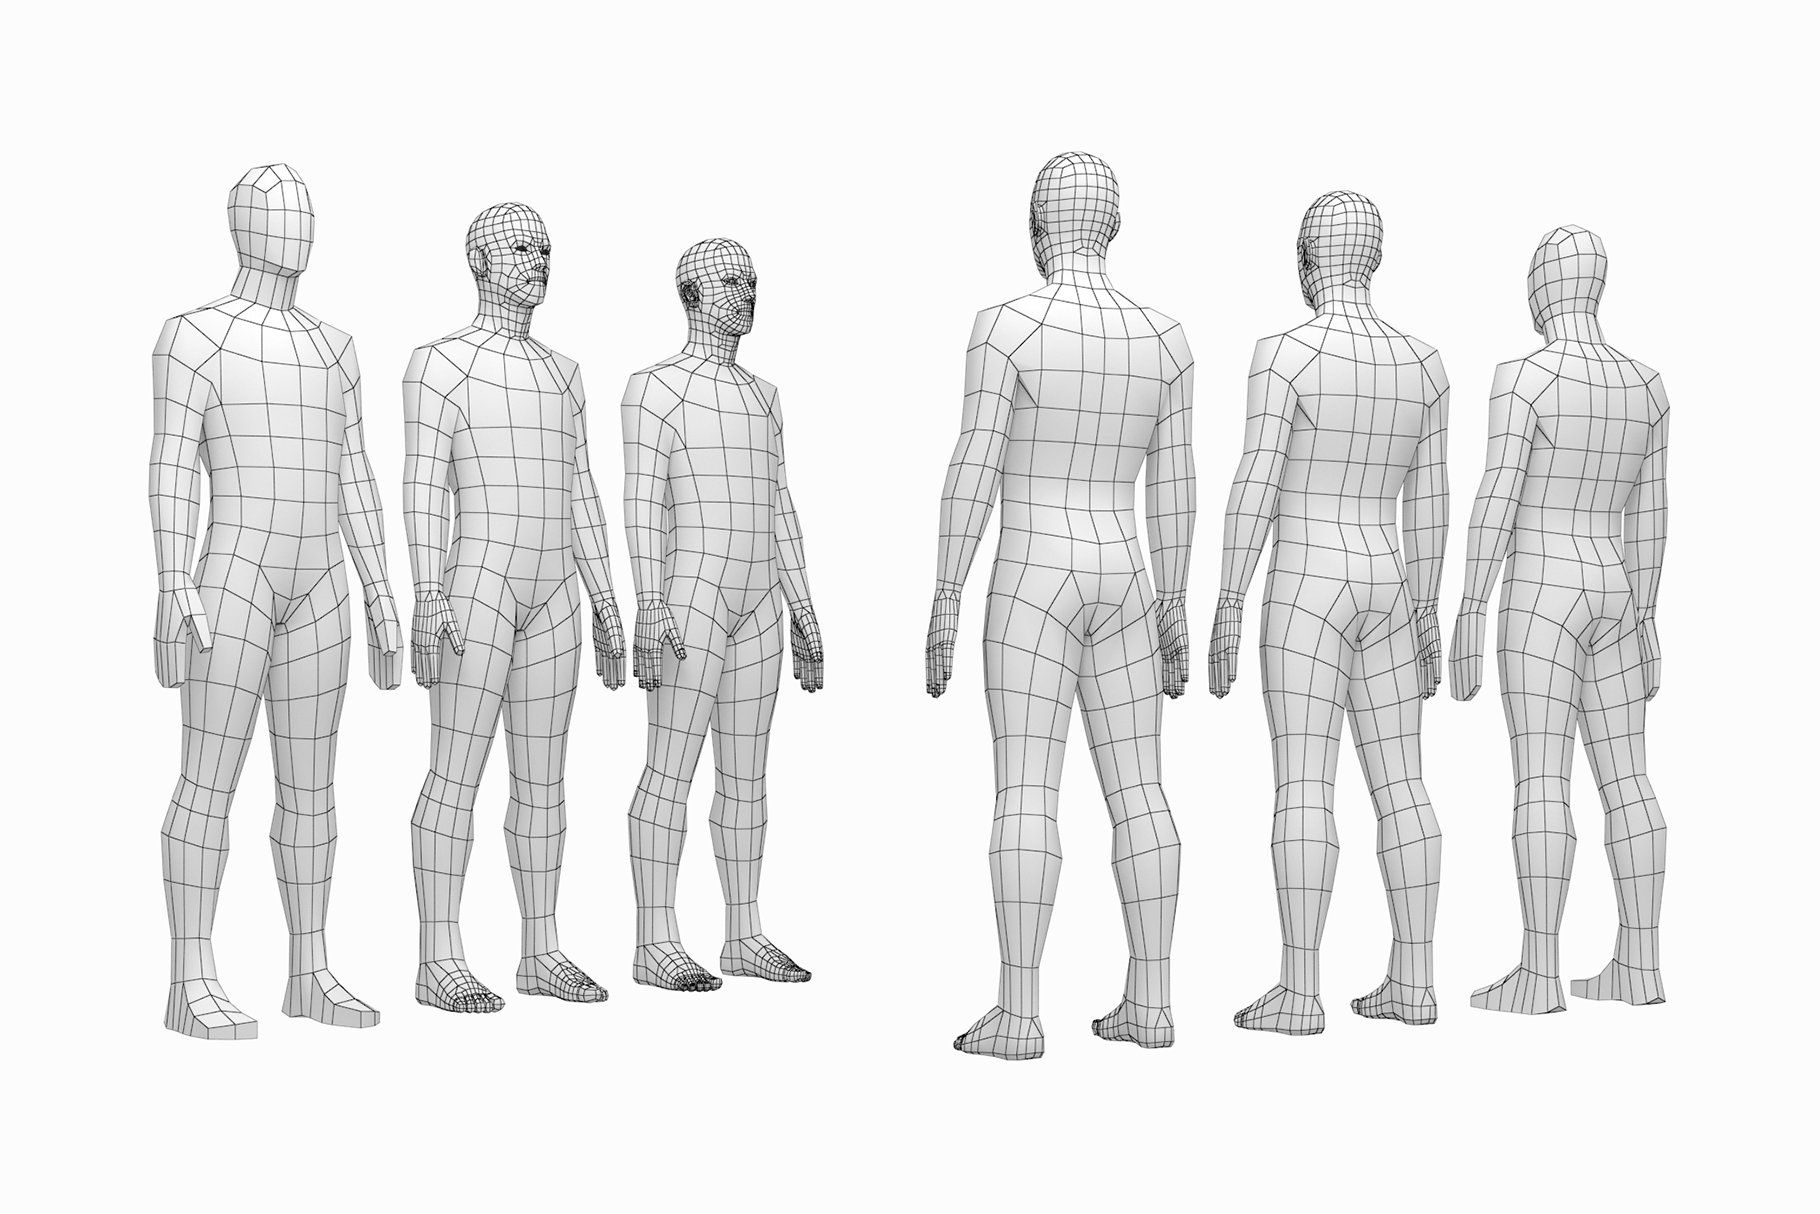 Rendering of a unique low poly 3d model of a male body without textures